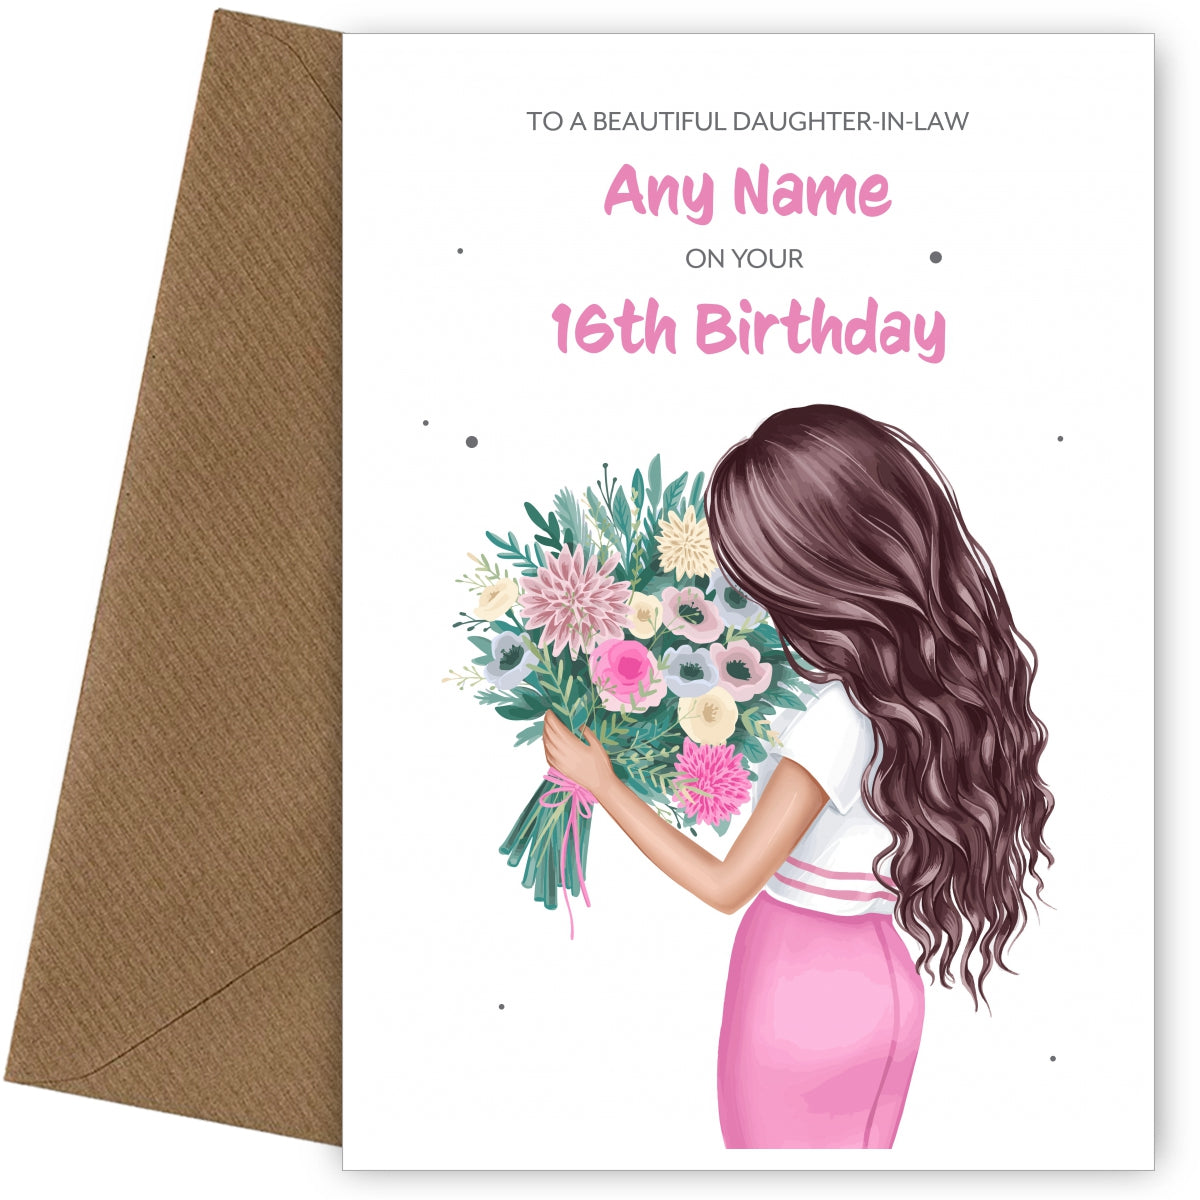 16th Birthday Card for Daughter-in-law - Beautiful Brunette